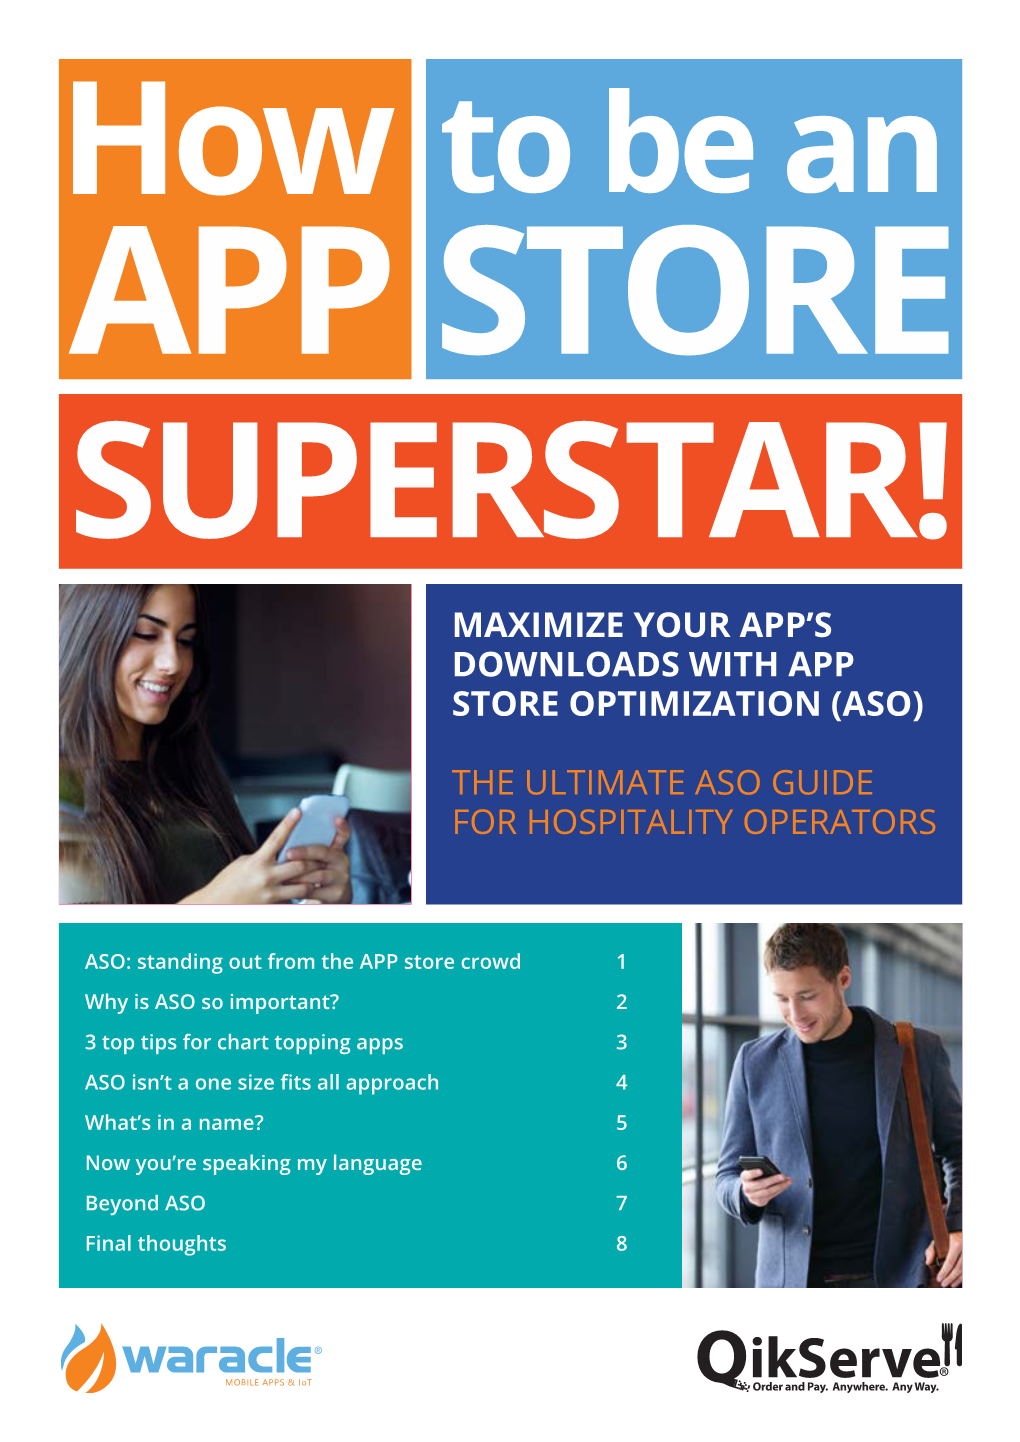 Maximize Your App's Downloads with App Store Optimization (Aso) the Ultimate Aso Guide for Hospitality Operators